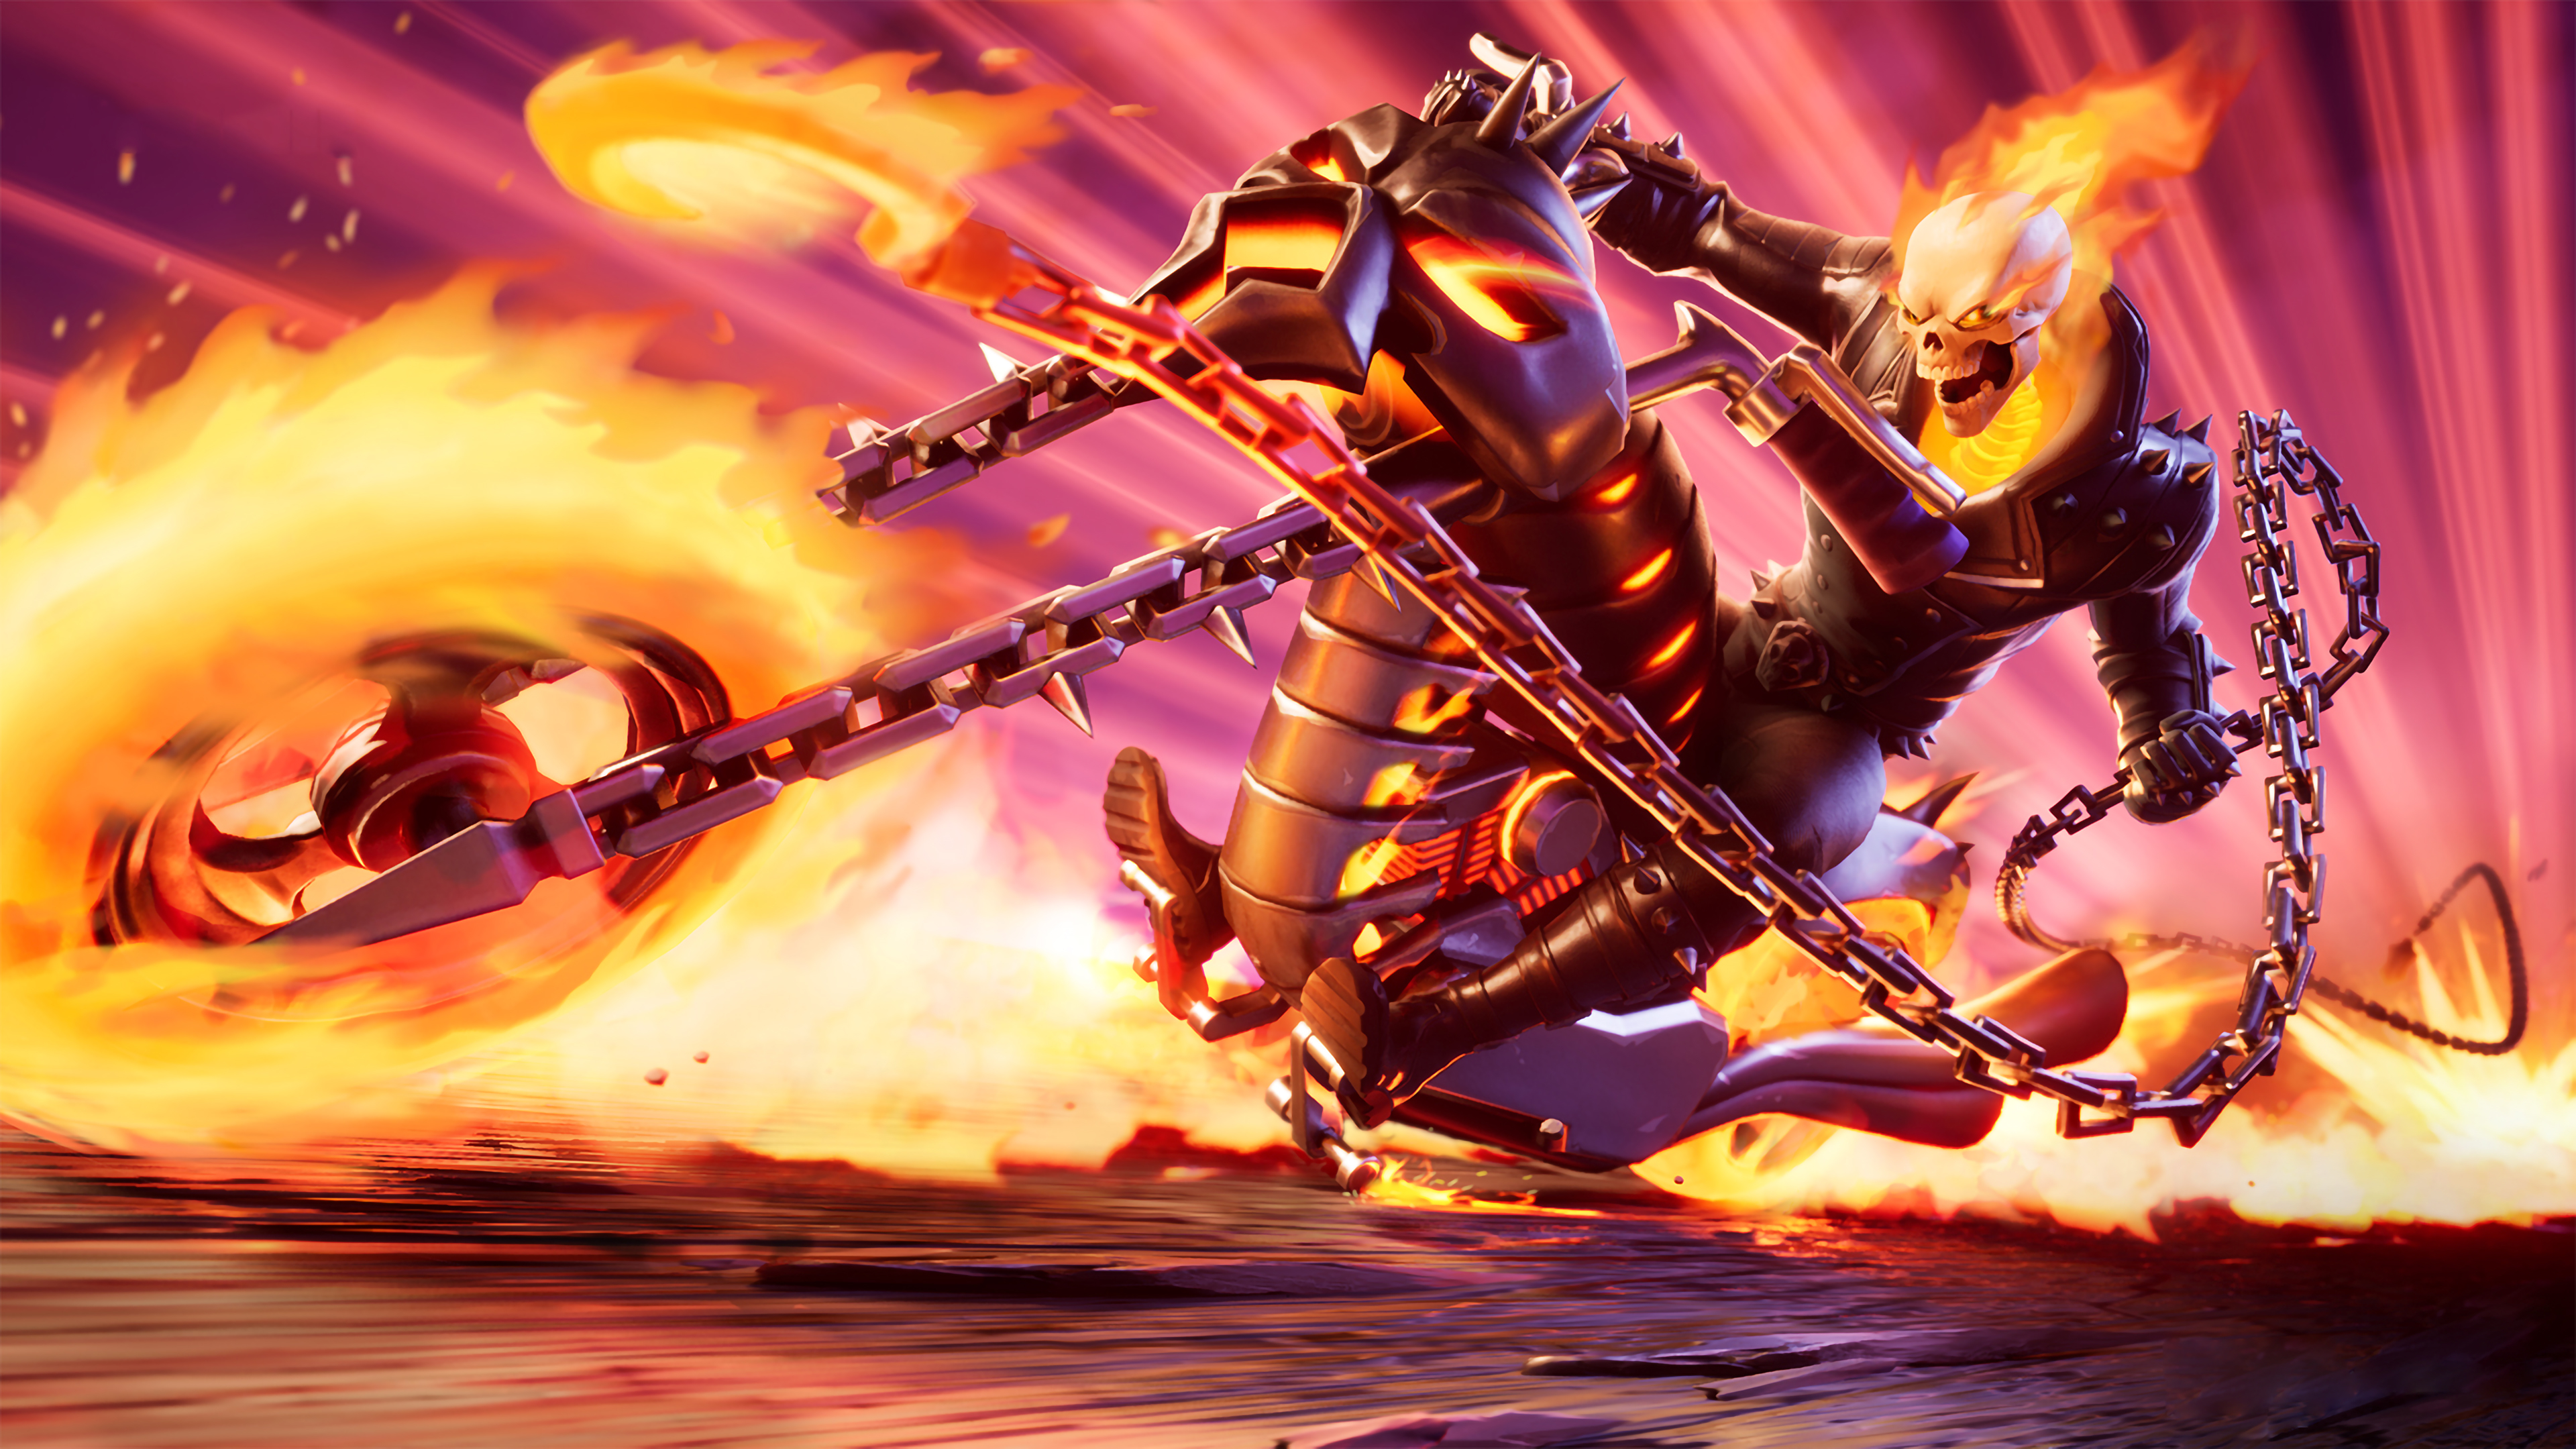 Ghost Rider 4k Fortnite Wallpaper Hd Games 4k Wallpapers Images Photos And Background